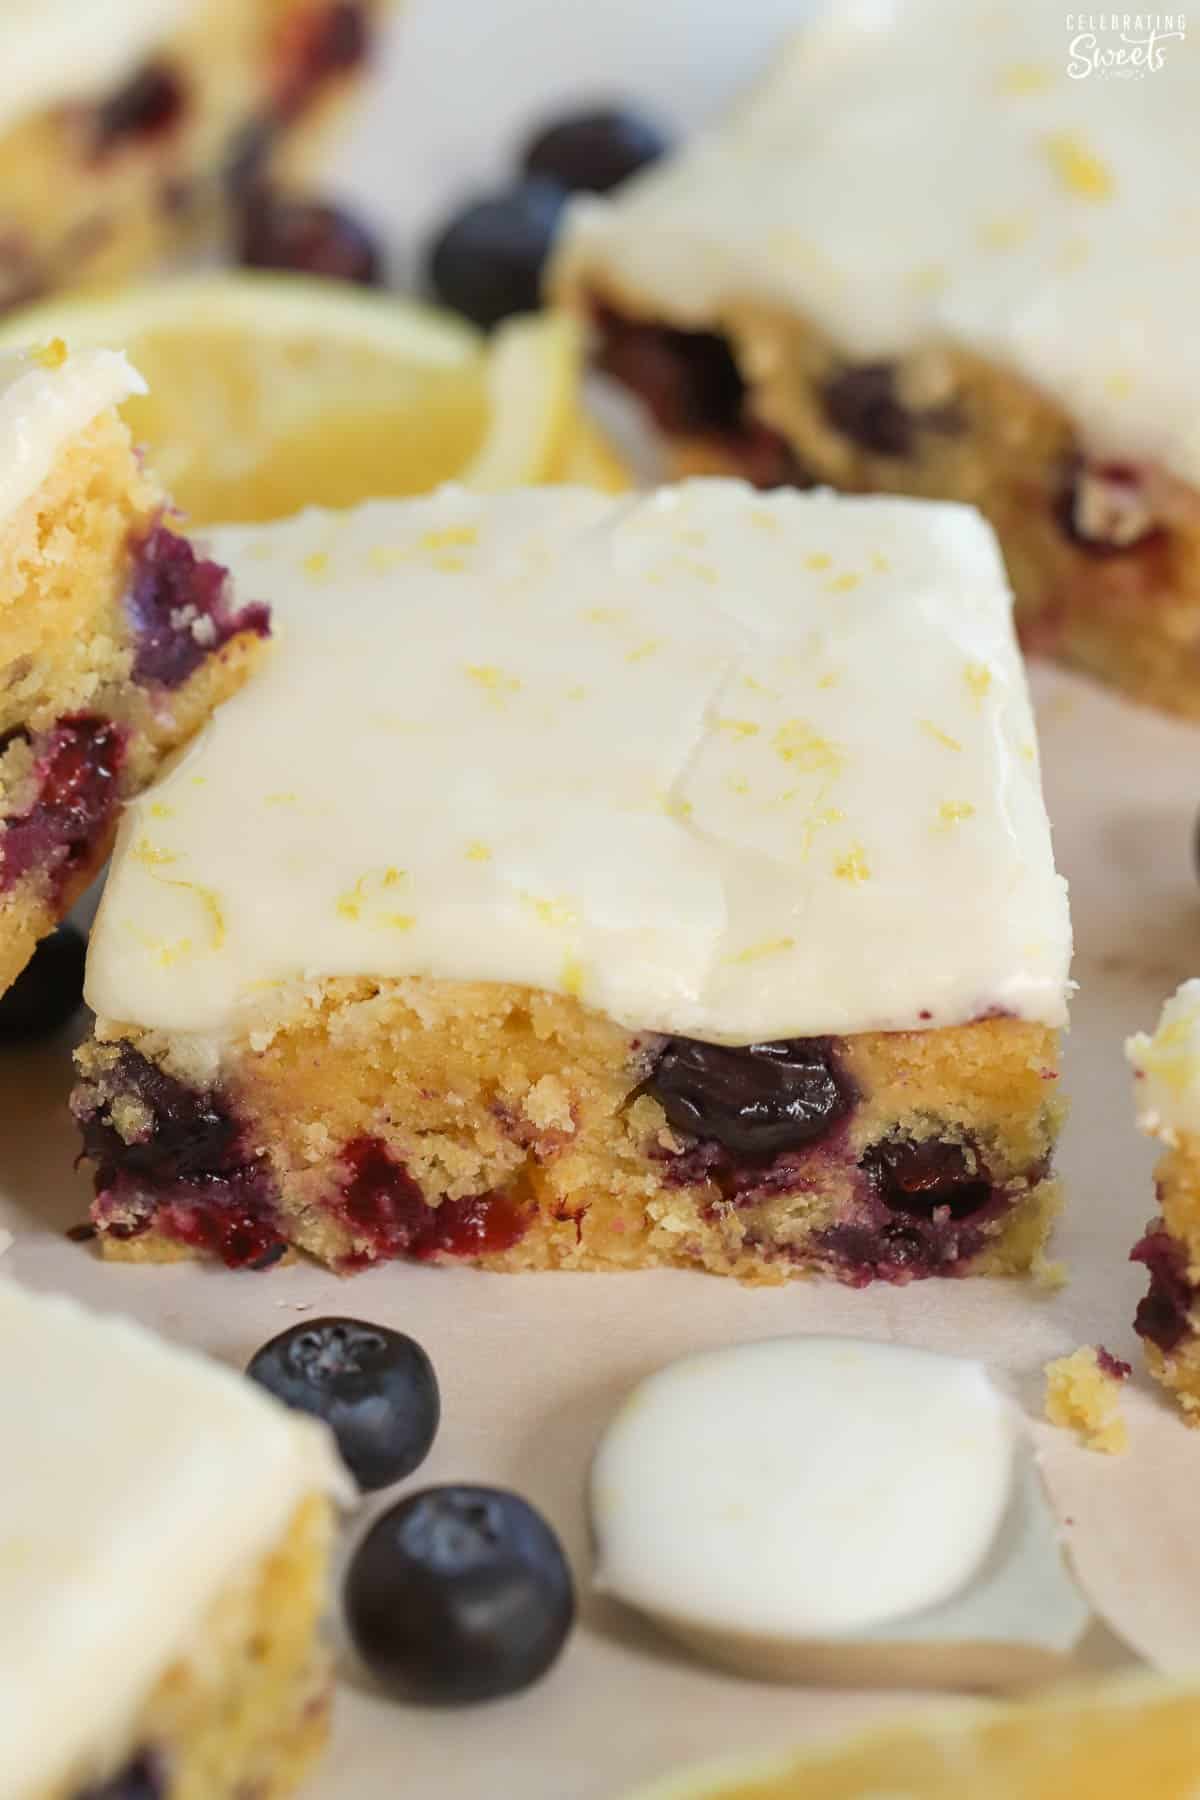 Lemon blueberry bar topped with white icing.